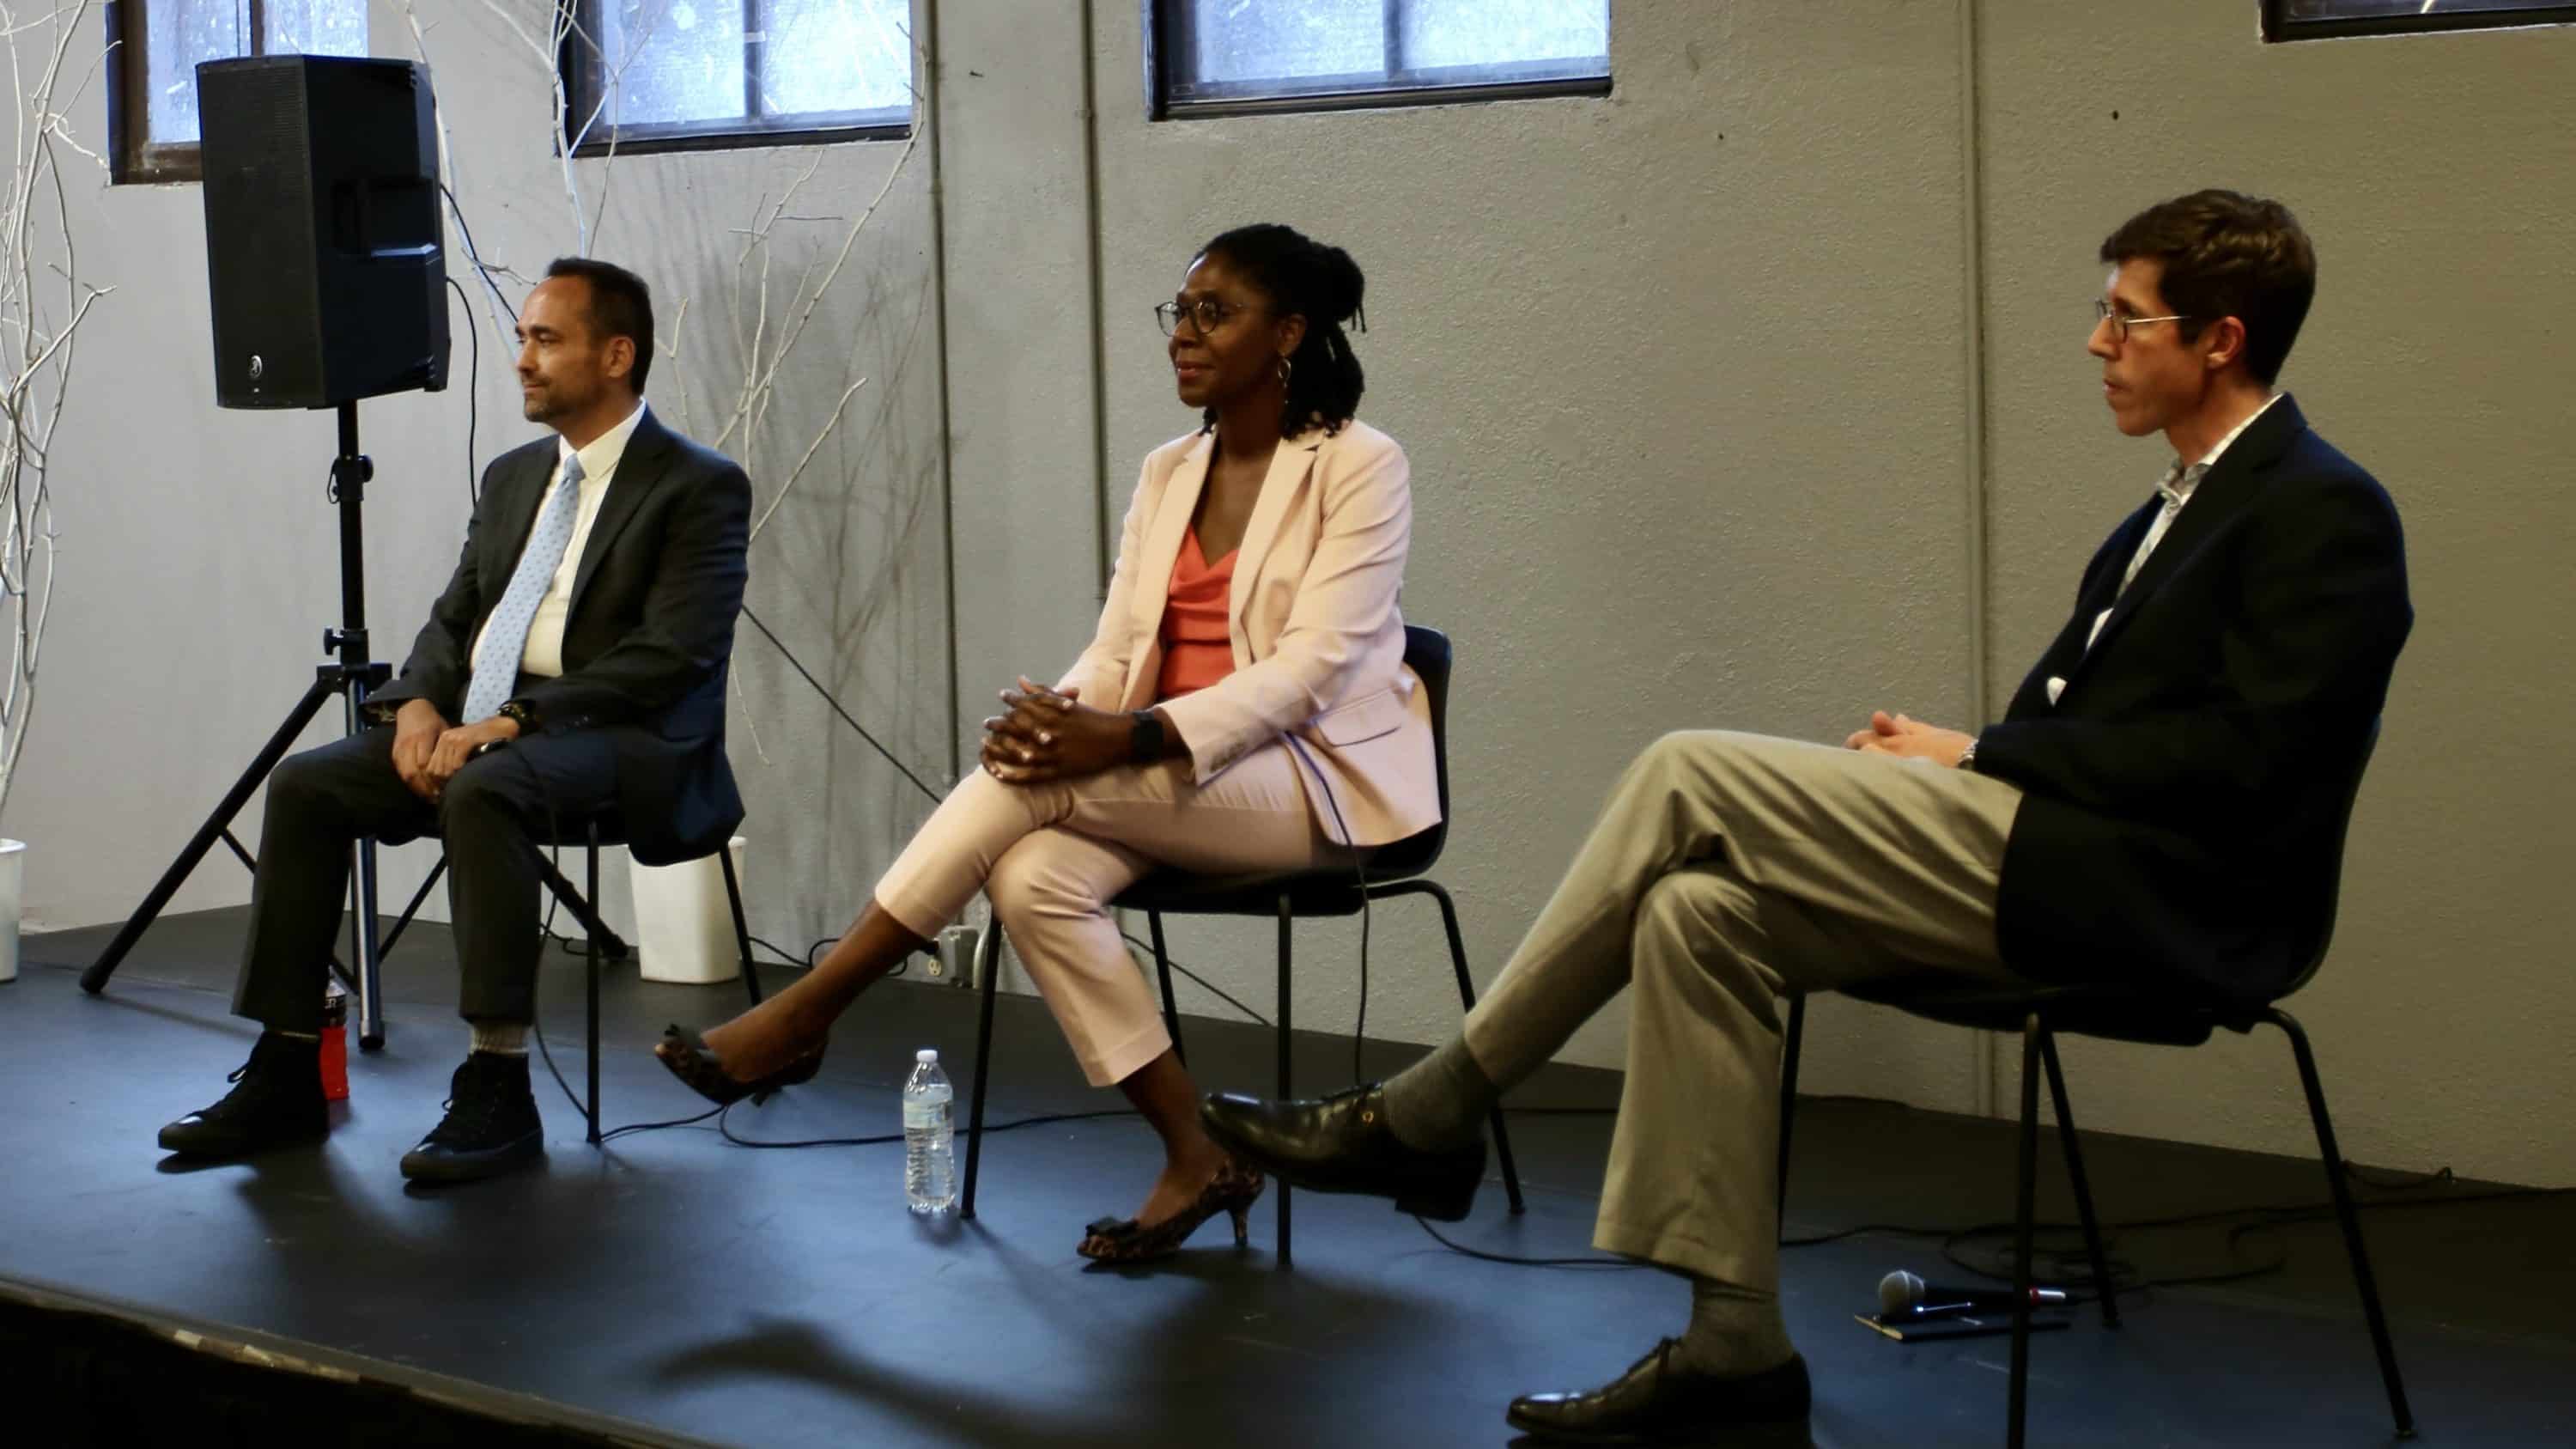 Rhode Island: Providence mayoral candidates make their case to voters at southside forum